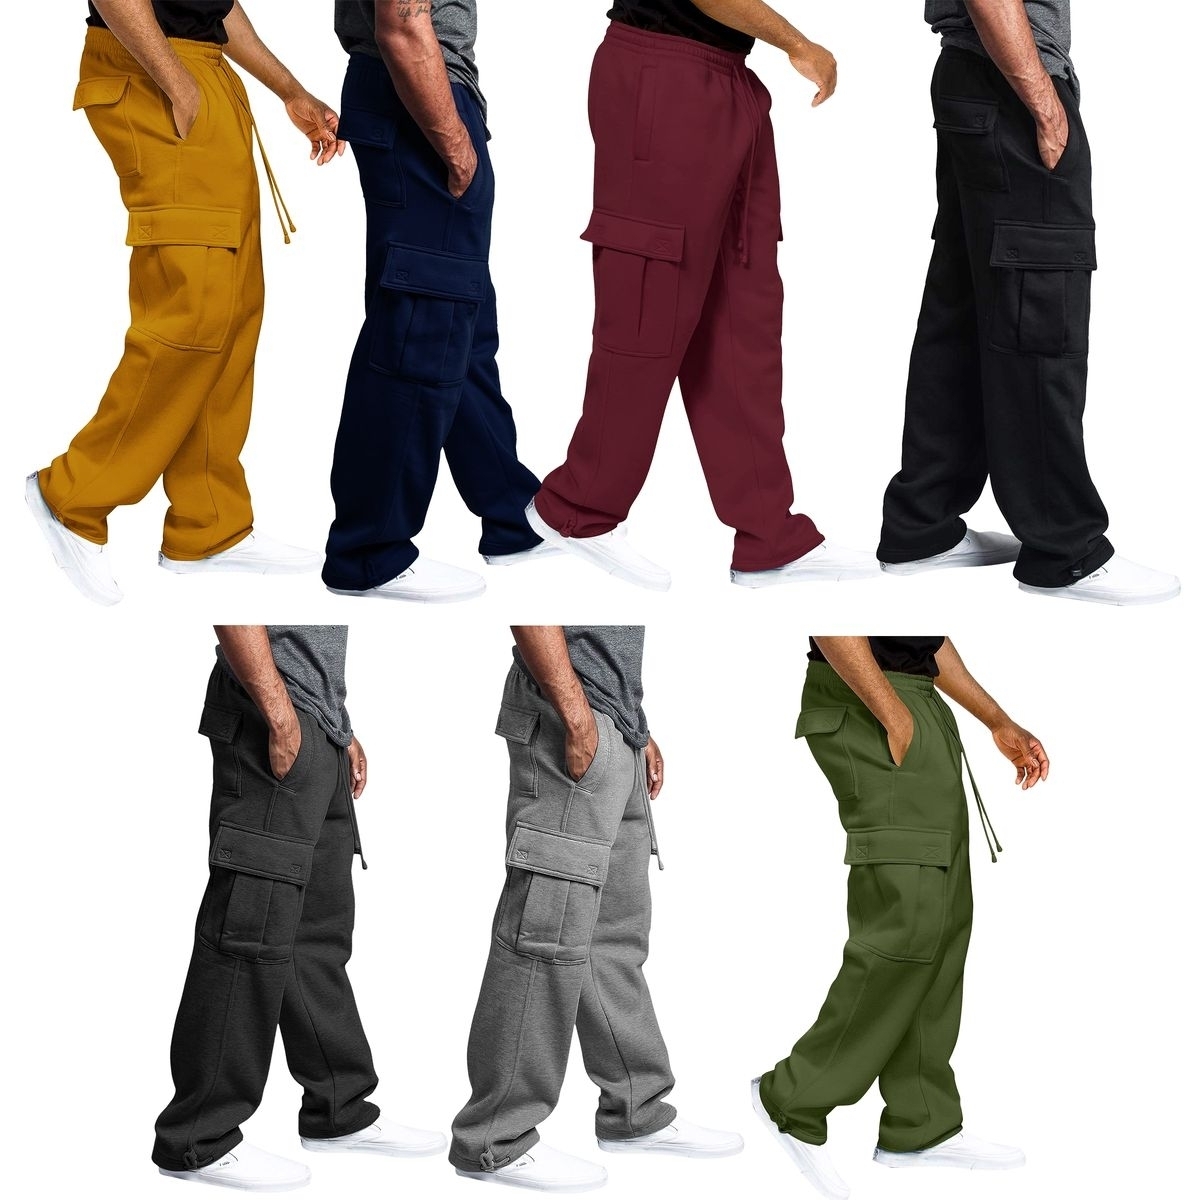 3-Pack: Men's Casual Solid Fleece Lined Cargo Jogger Sweatpants With Pockets - X-large